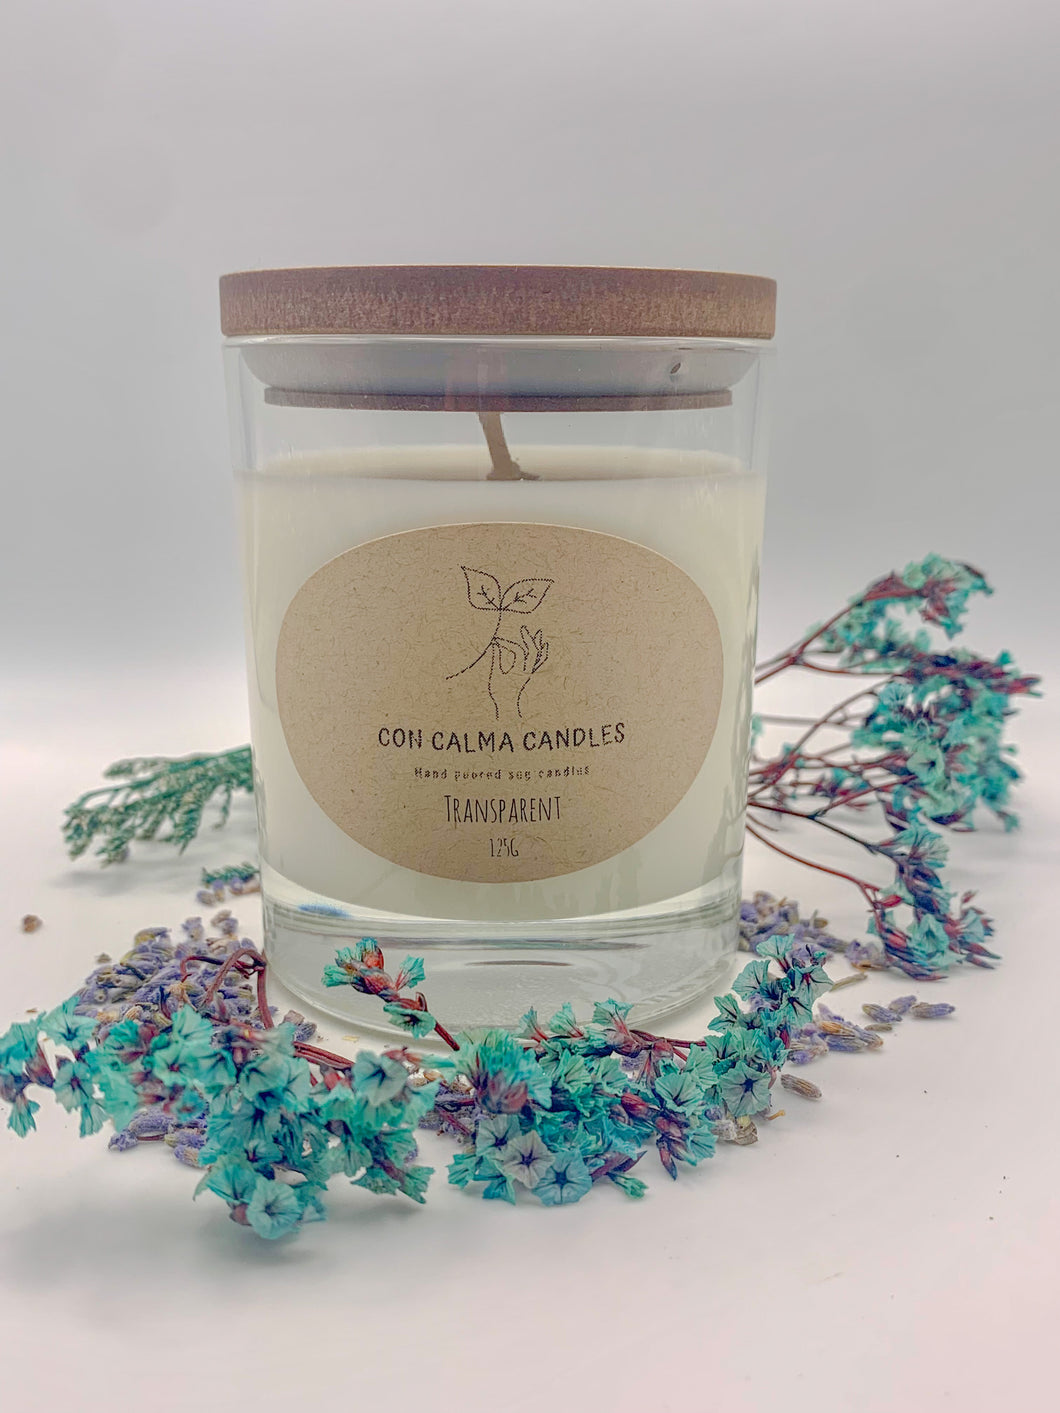 Transparent soy wax candle